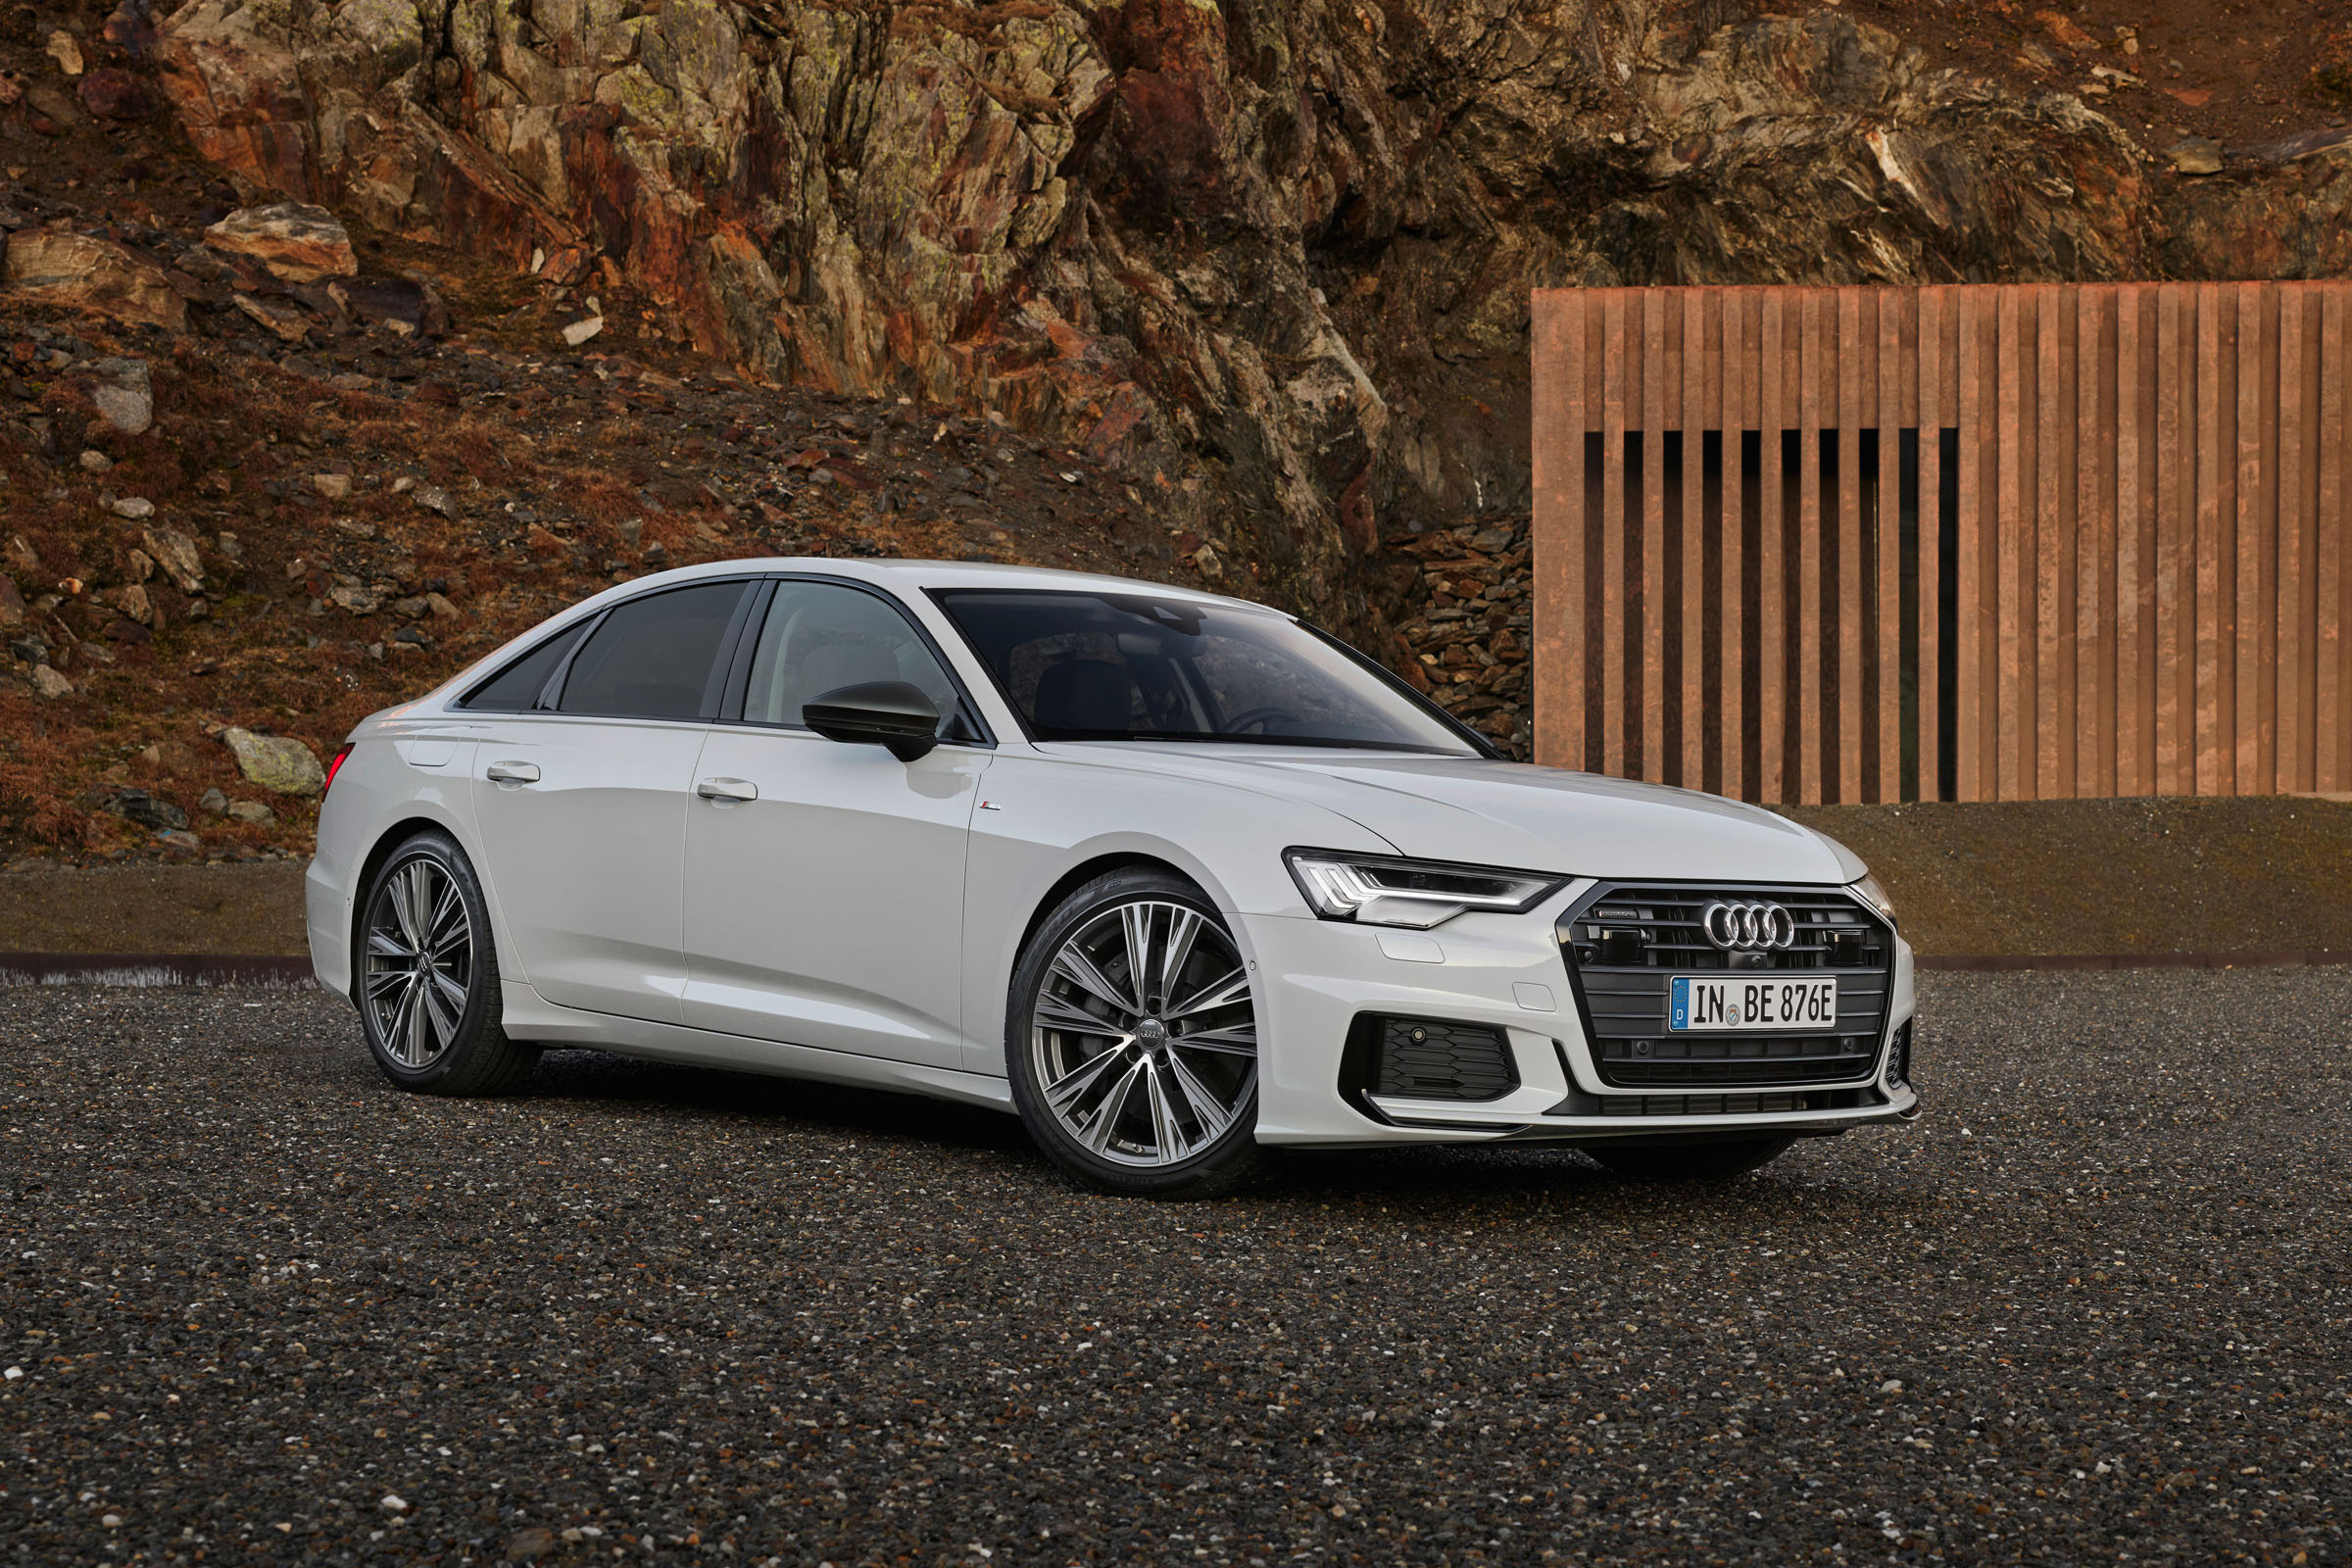 Audi A6 hybrid 2020: prices, specifications and on-sale date